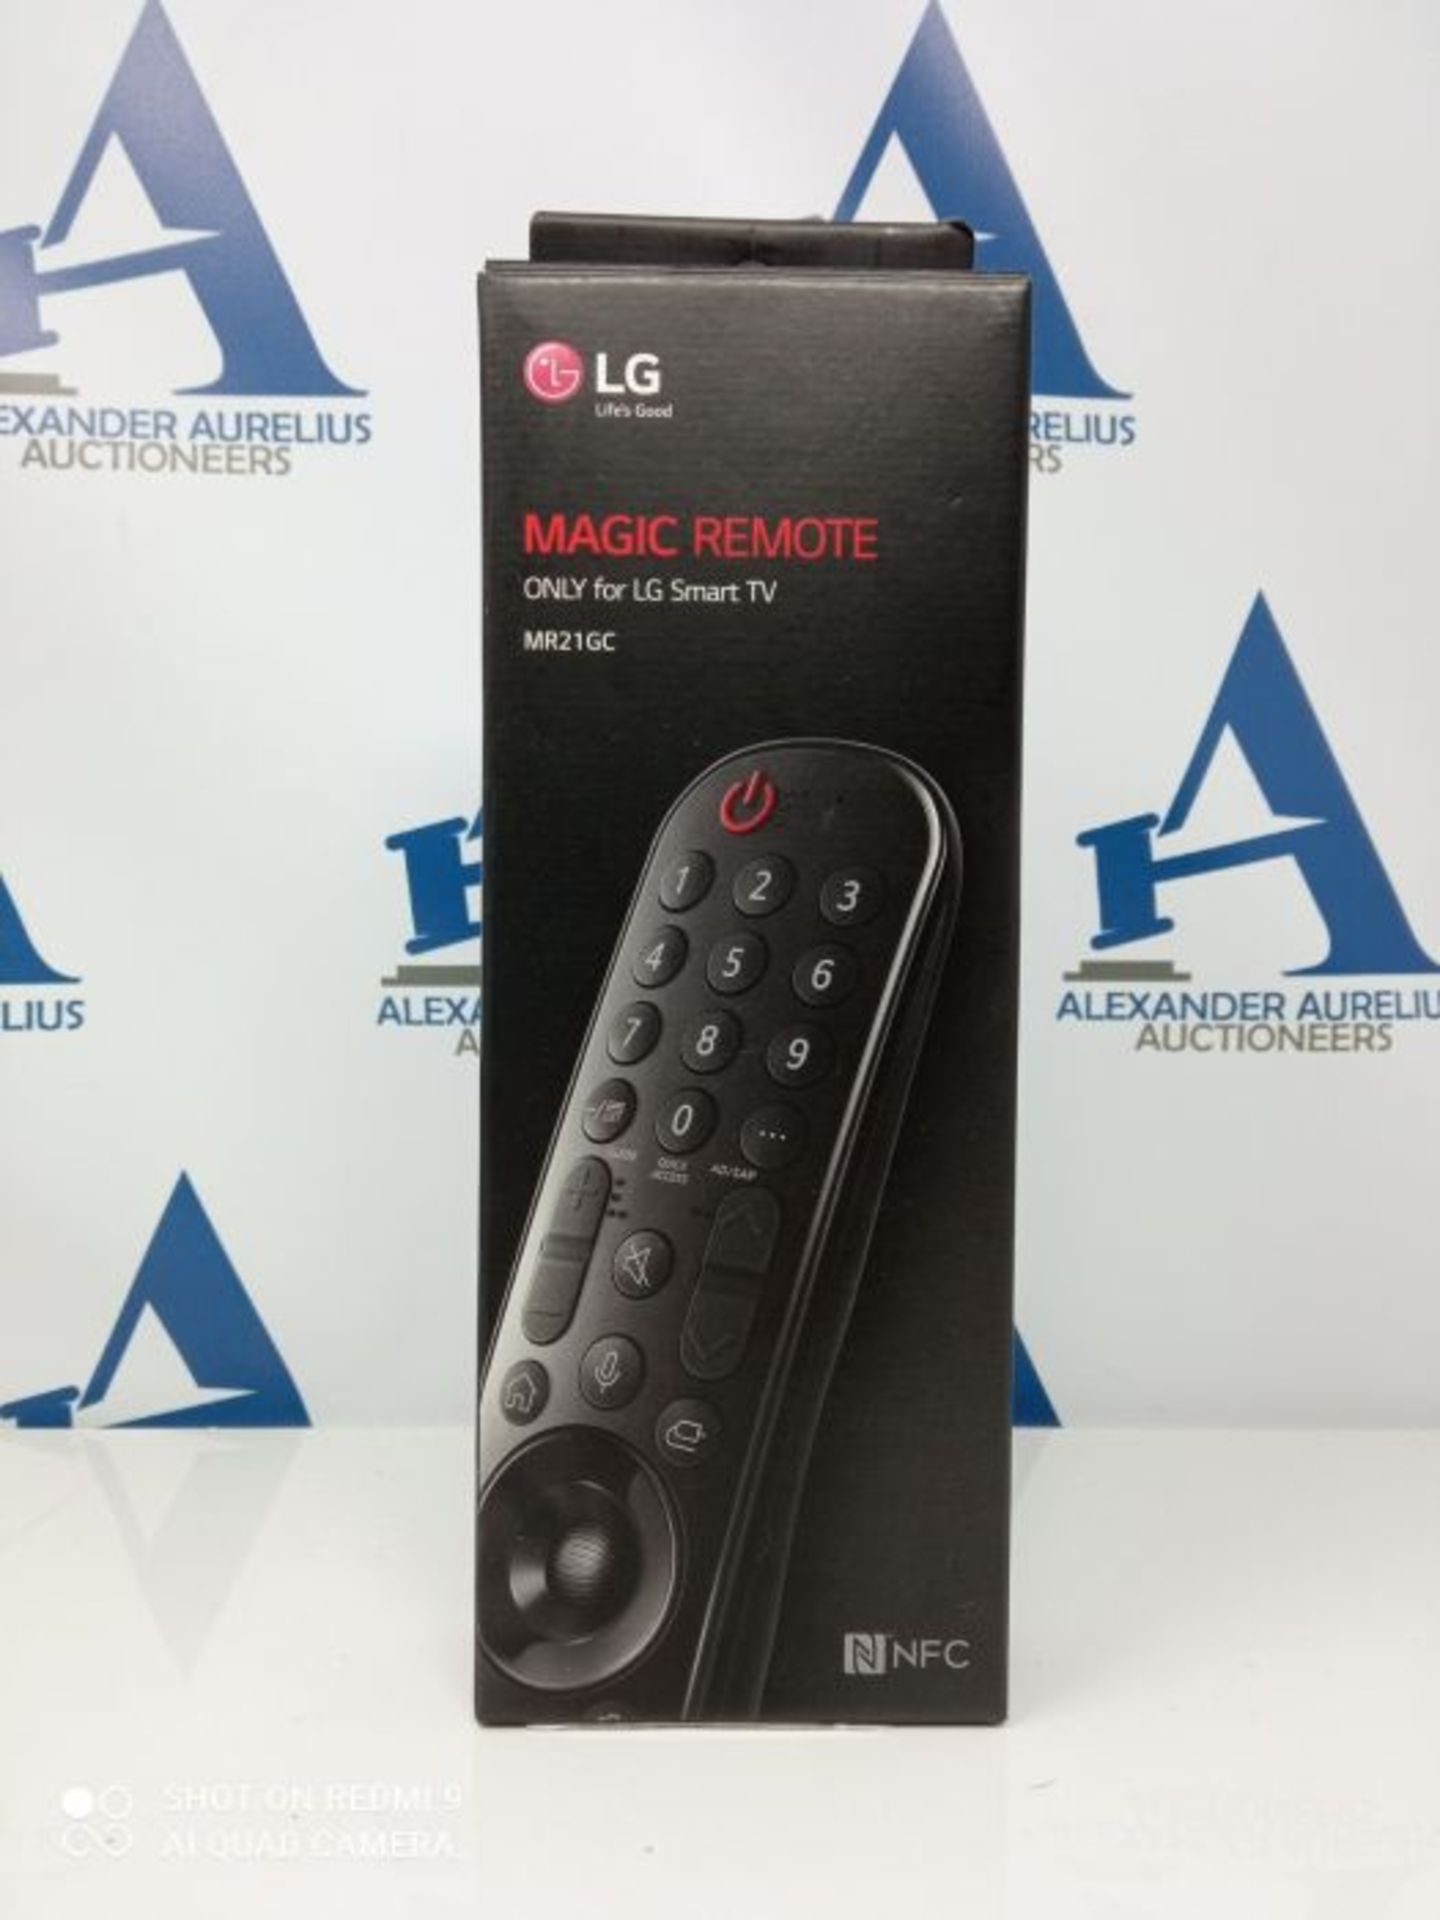 Remote Control TV LG MR21GC Magic Remote, Vocal Recognition, Compatible with LG Smart - Image 2 of 3